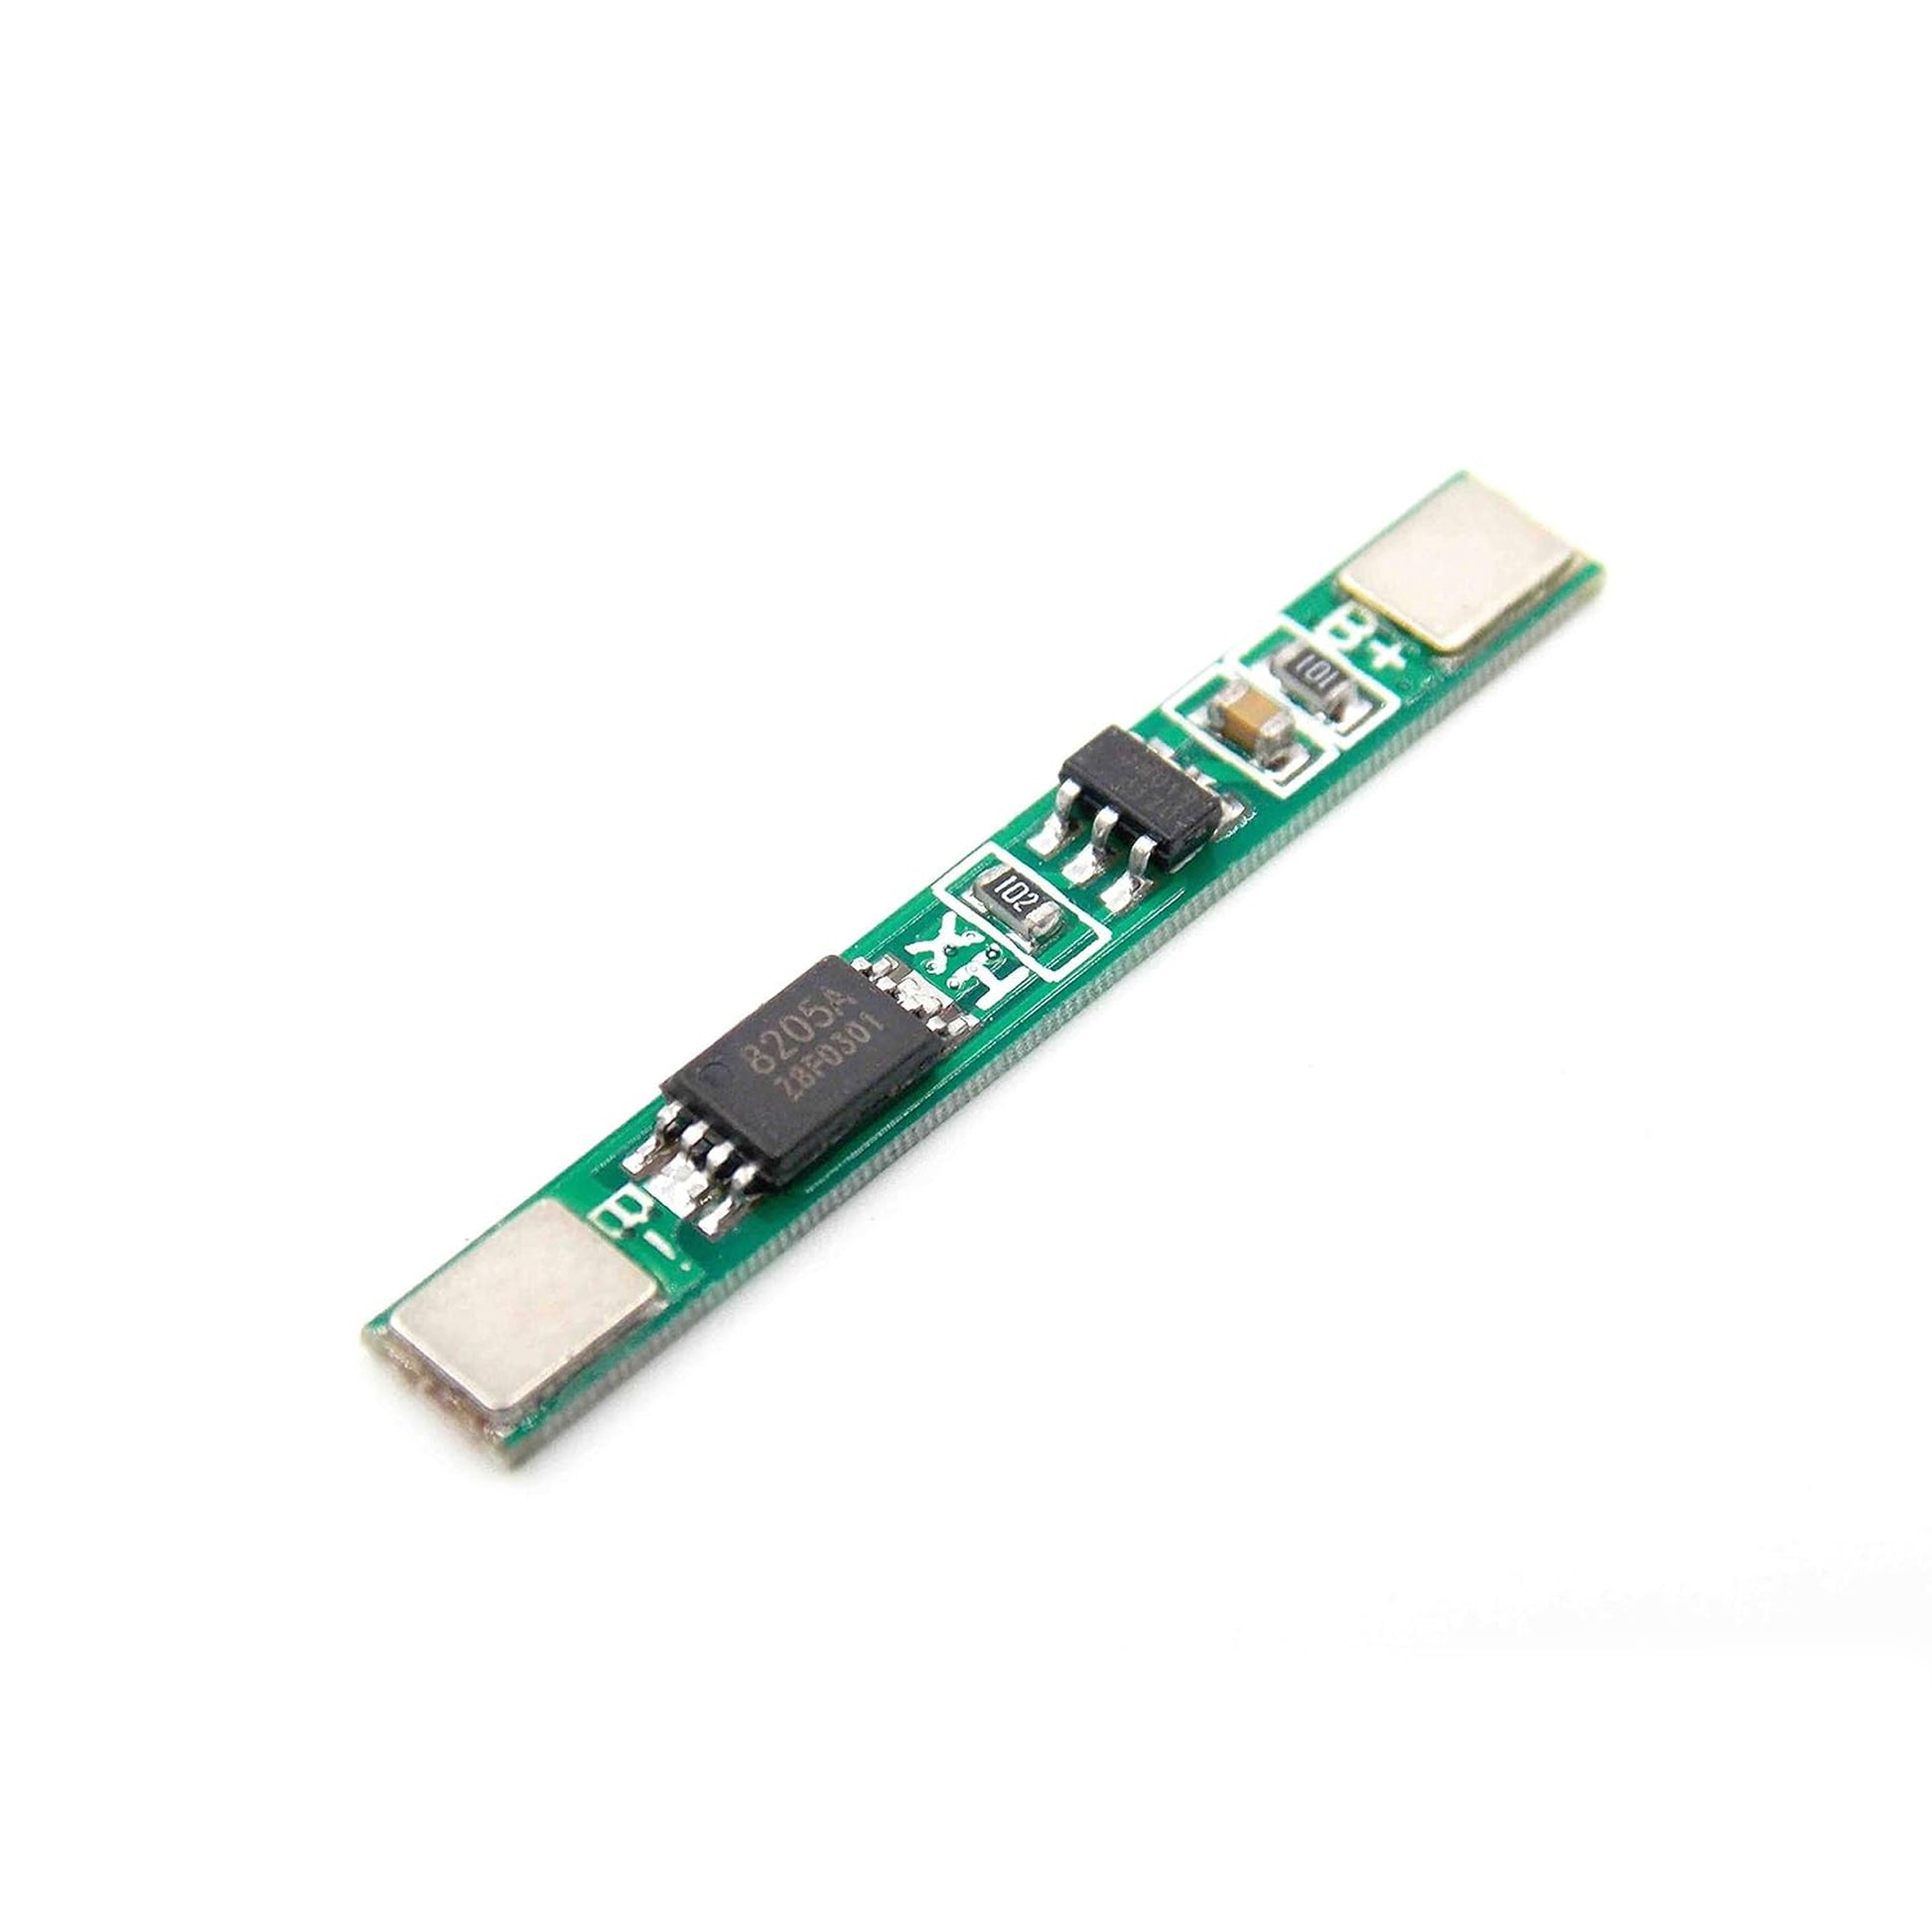 BMS Board 1S 3.7V 2.5A Lithium Battery Protection Board Polymer BMS PCM PCB Over Charge Discharge Li-ion Protect Module - RS4822 - REES52